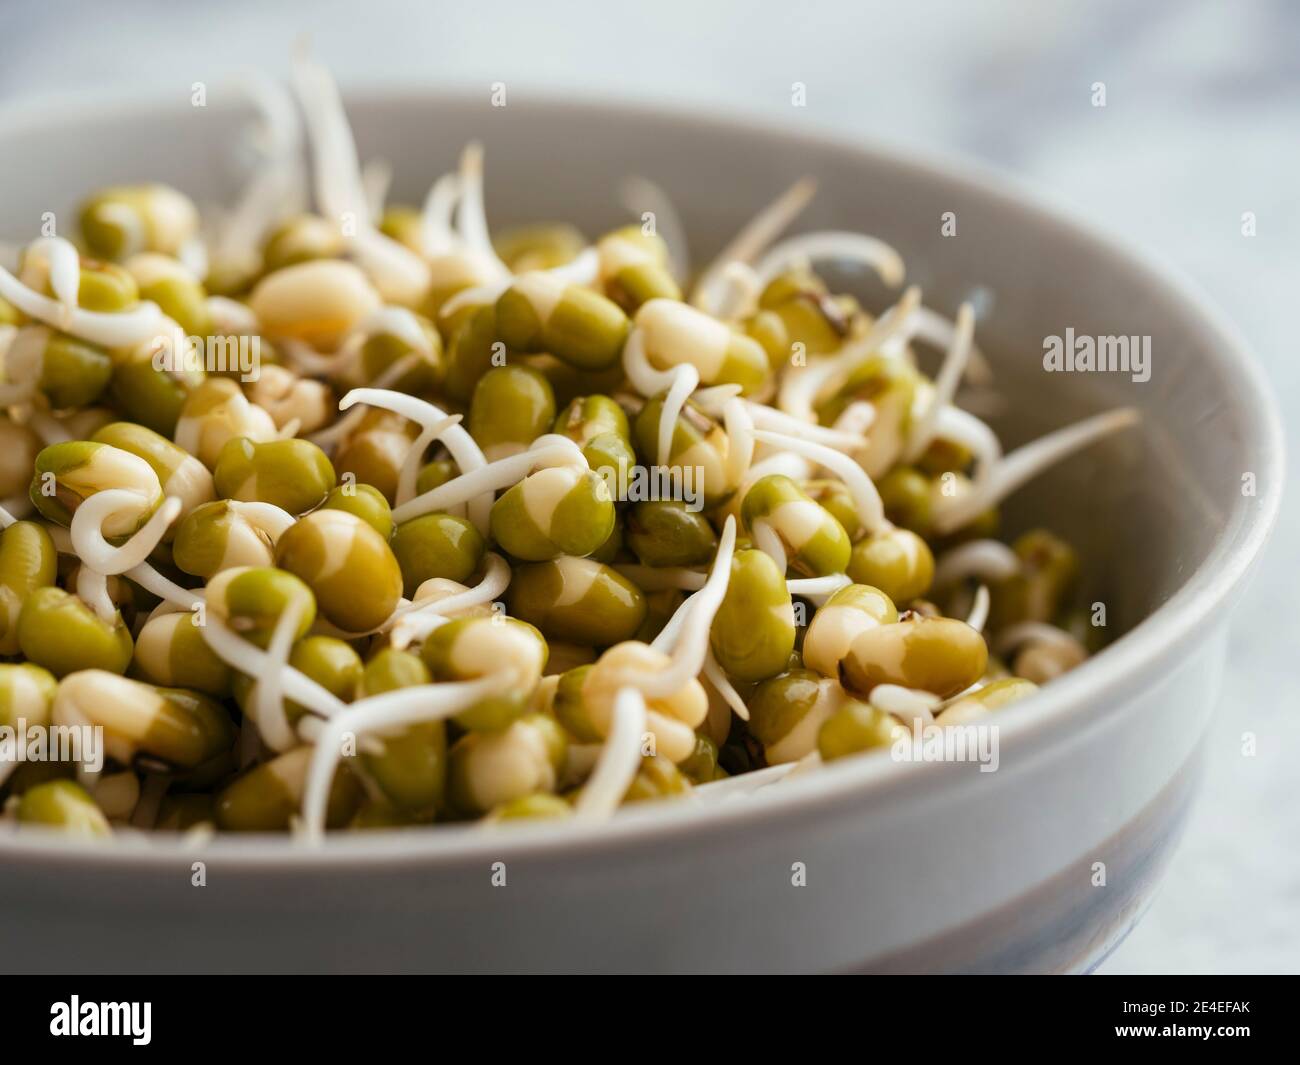 Small bowl with sprouted mung beans. Stock Photo